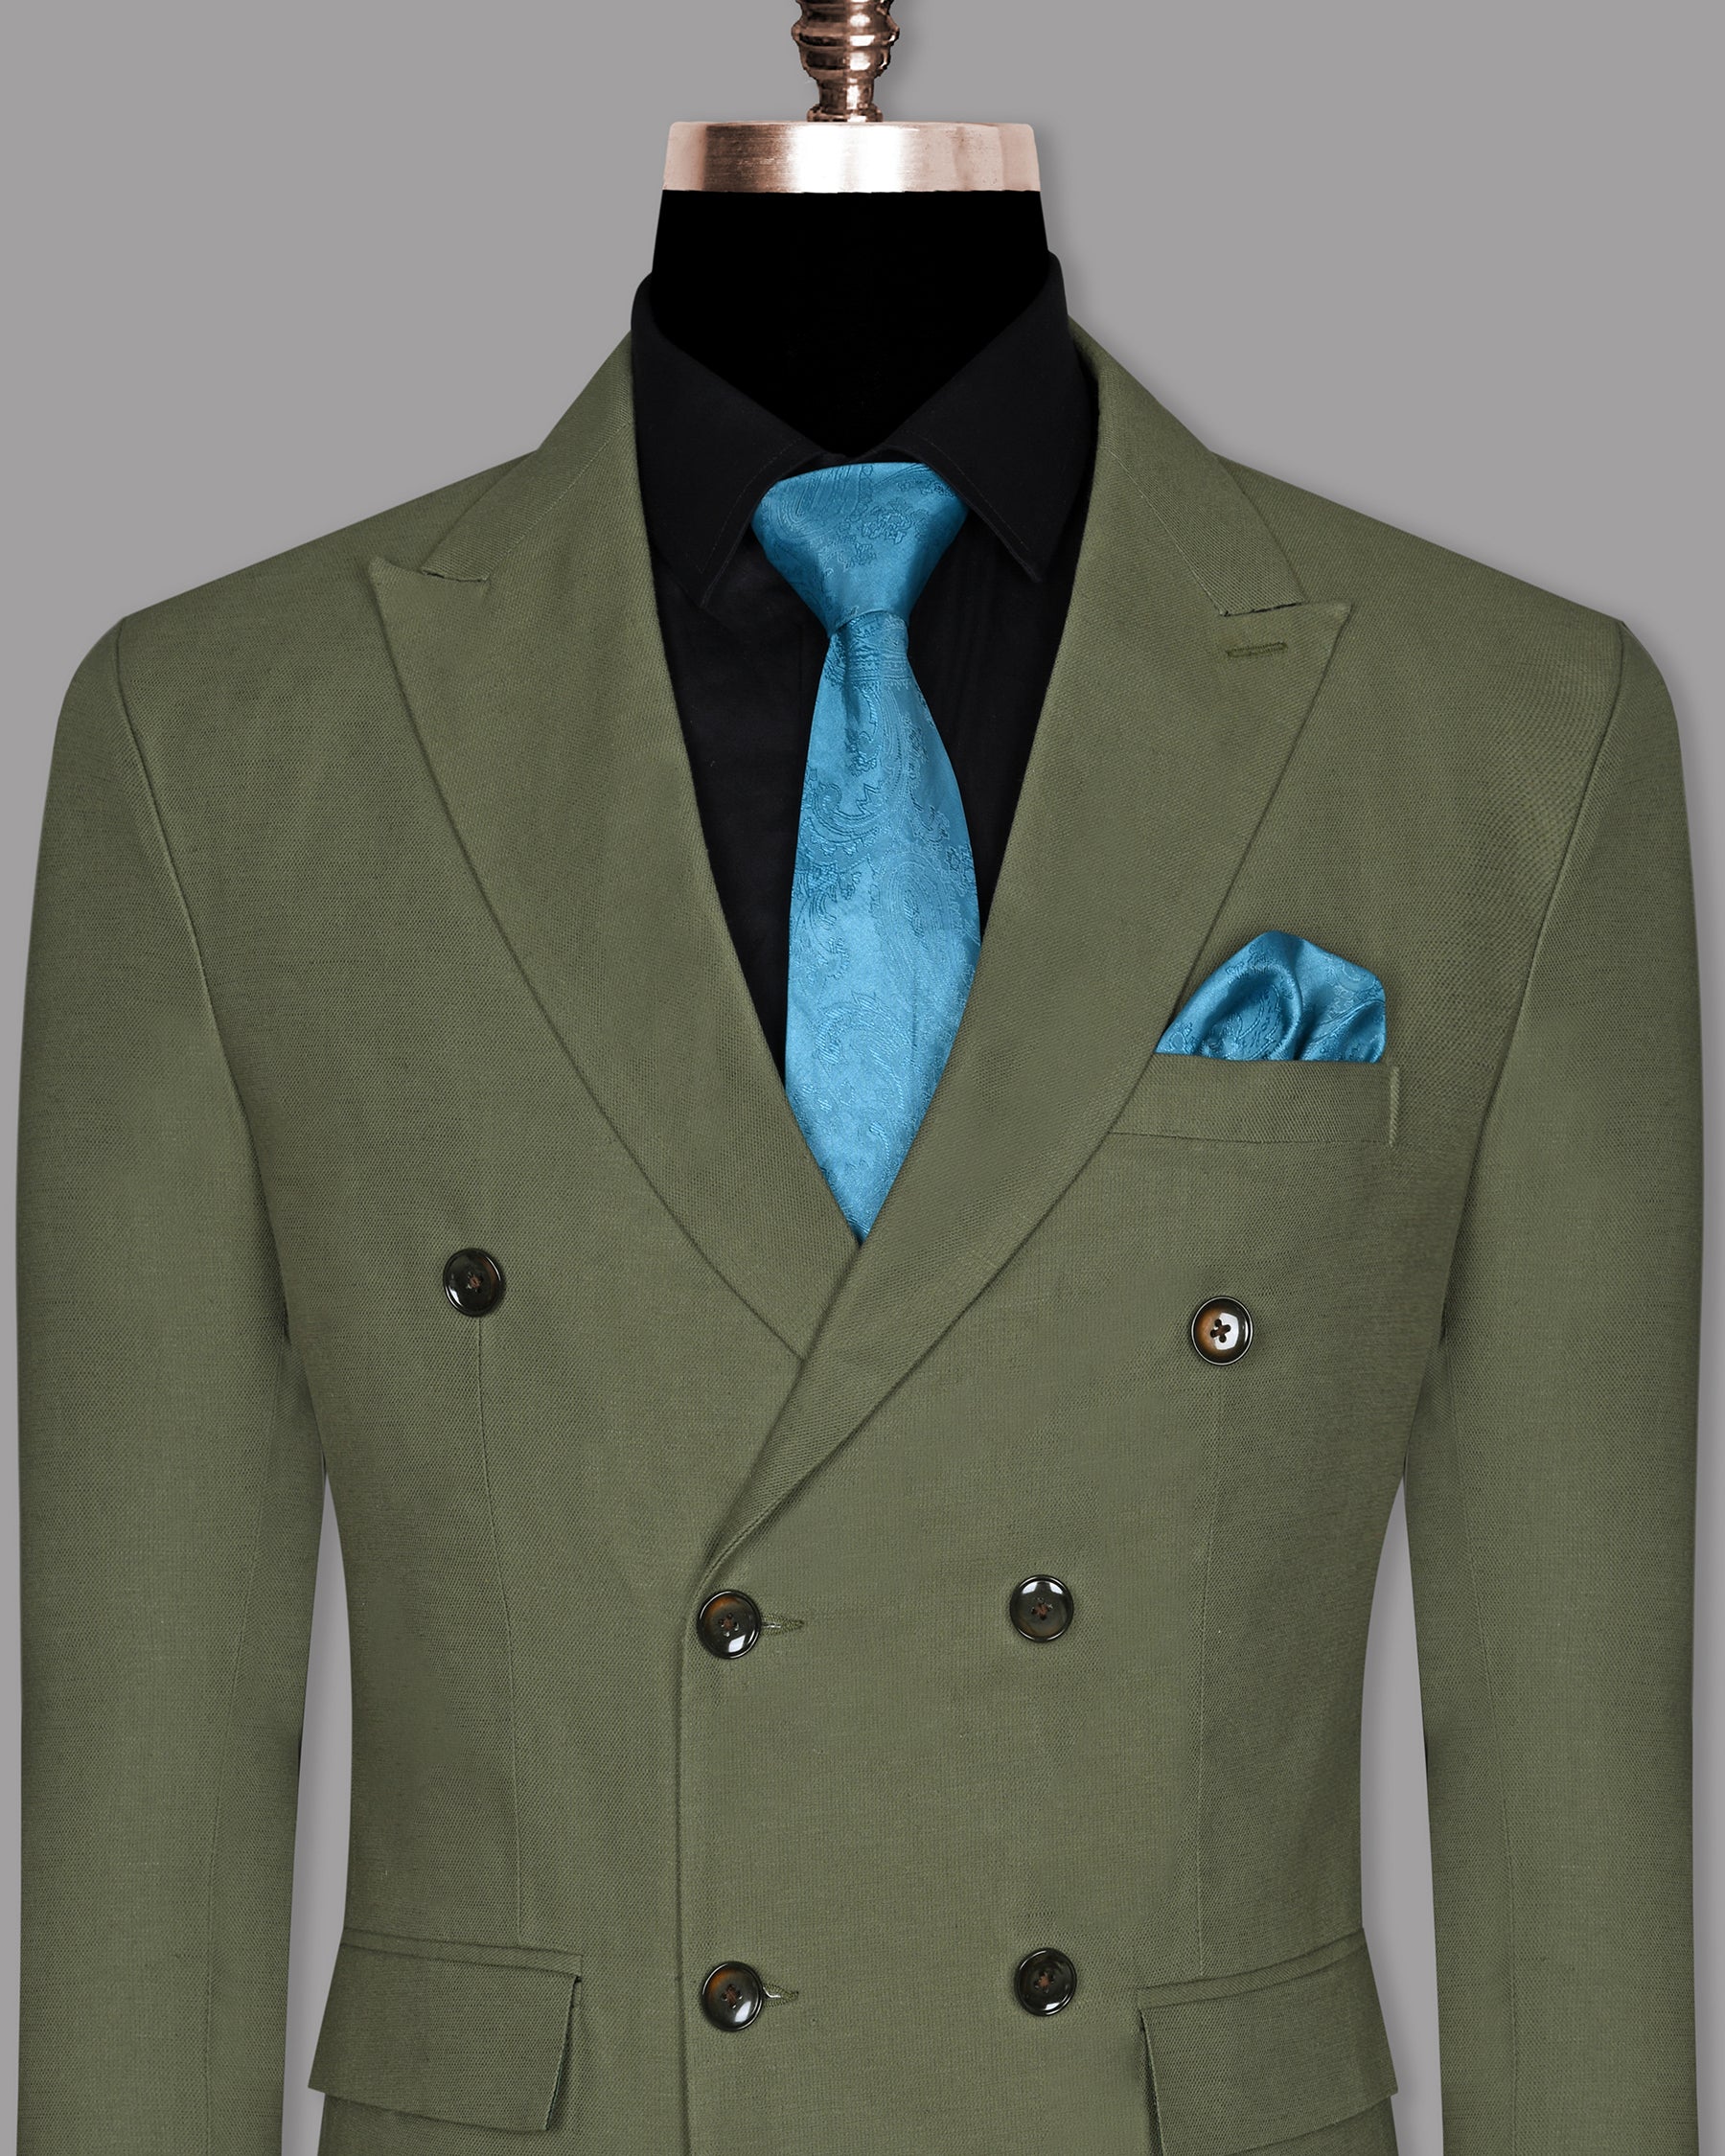 Olive Luxurious Linen Double Breasted Blazer BL735DB-56, BL735DB-52, BL735DB-40, BL735DB-58, BL735DB-48, BL735DB-60, BL735DB-44, BL735DB-36, BL735DB-42, BL735DB-54, BL735DB-38, BL735DB-50, BL735DB-46